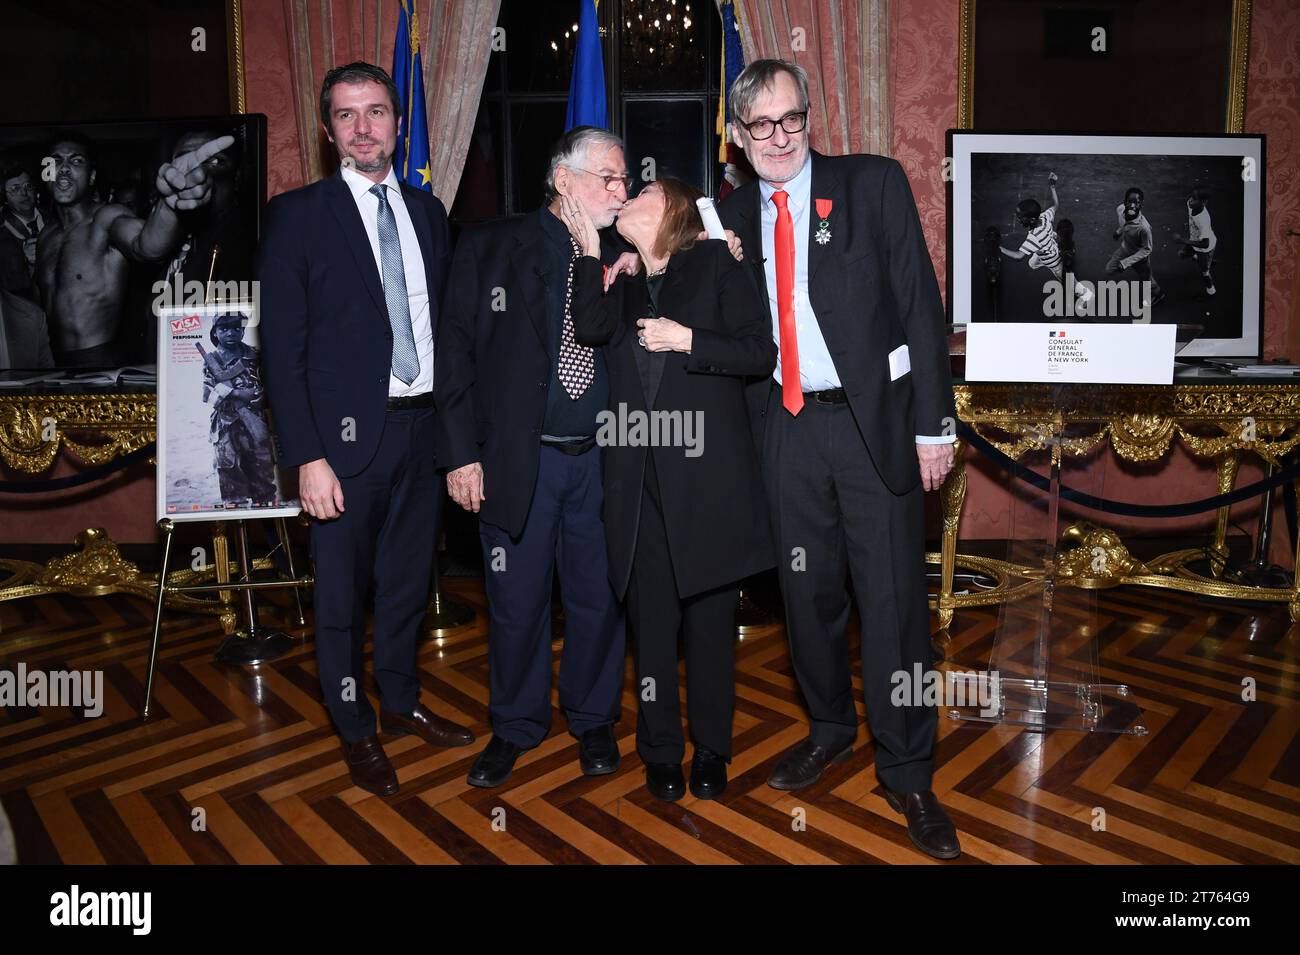 New York, USA. 13th Nov, 2023. French-American photojournalist Jean-Pierre Laffont kisses his wife Eliane Laffont as they pose with Jeremie Robert (l), Consul General of France in New York and French photojournalist Jean-Francois Leroy at after the ceremony awarding Mr. Laffont with the insignia of Knight in the National Order of the French Legion of Honor, held at the Consulat General de France in New York, NY, November 13, 2023. (Photo by Anthony Behar/Sipa USA) Credit: Sipa USA/Alamy Live News Stock Photo